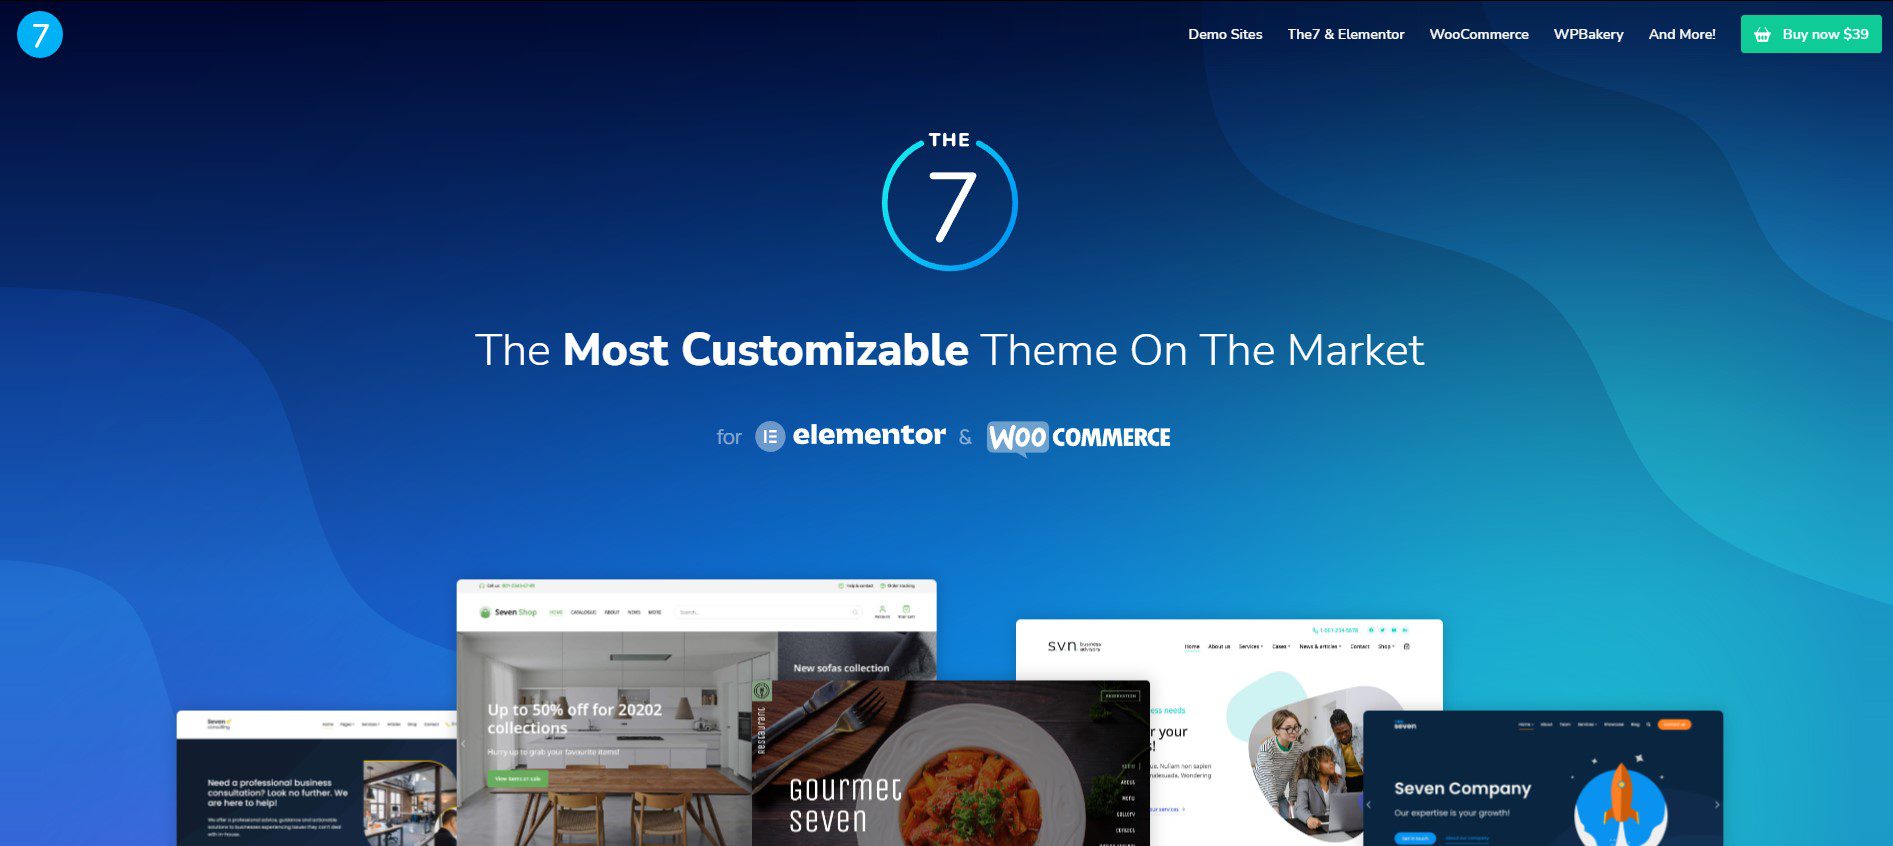 the7 - a black pearl In the ocean of the most popular wordpress theme 